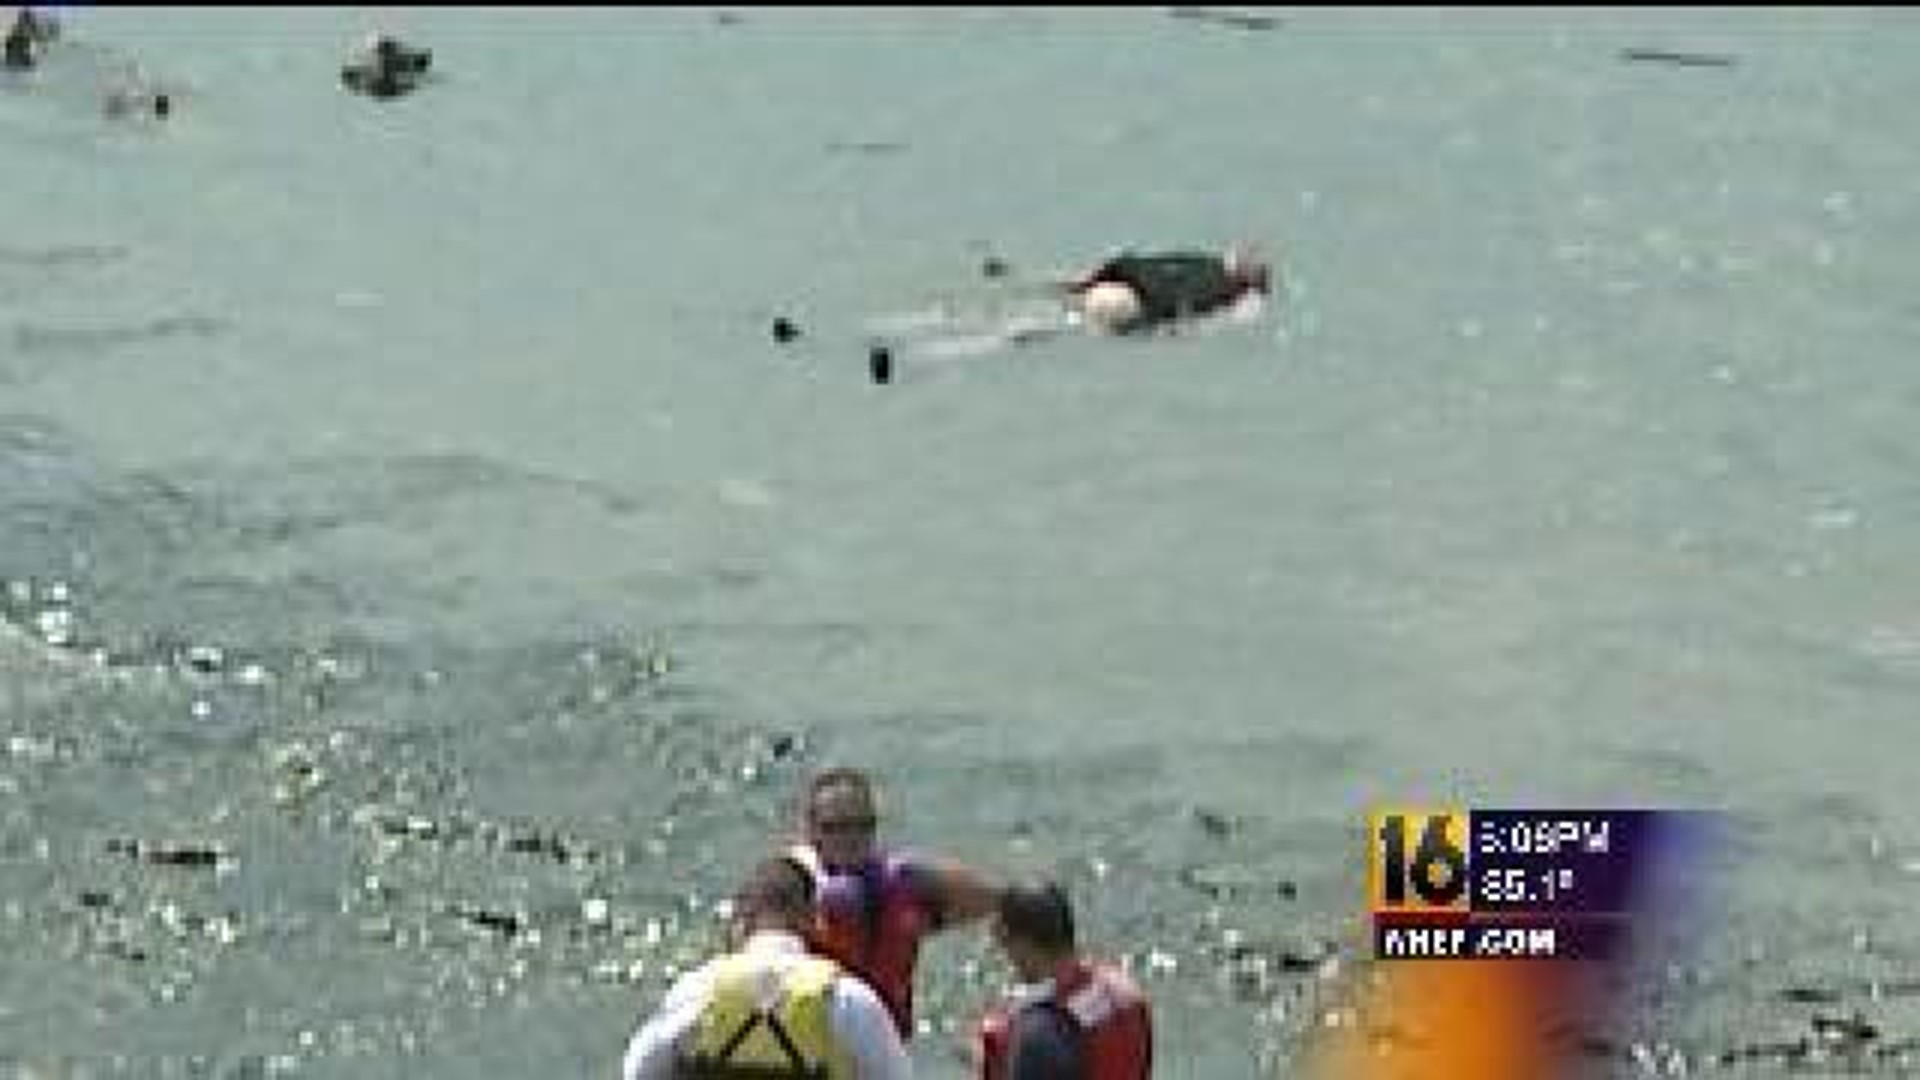 Sleeping Swimmer Causes Scare